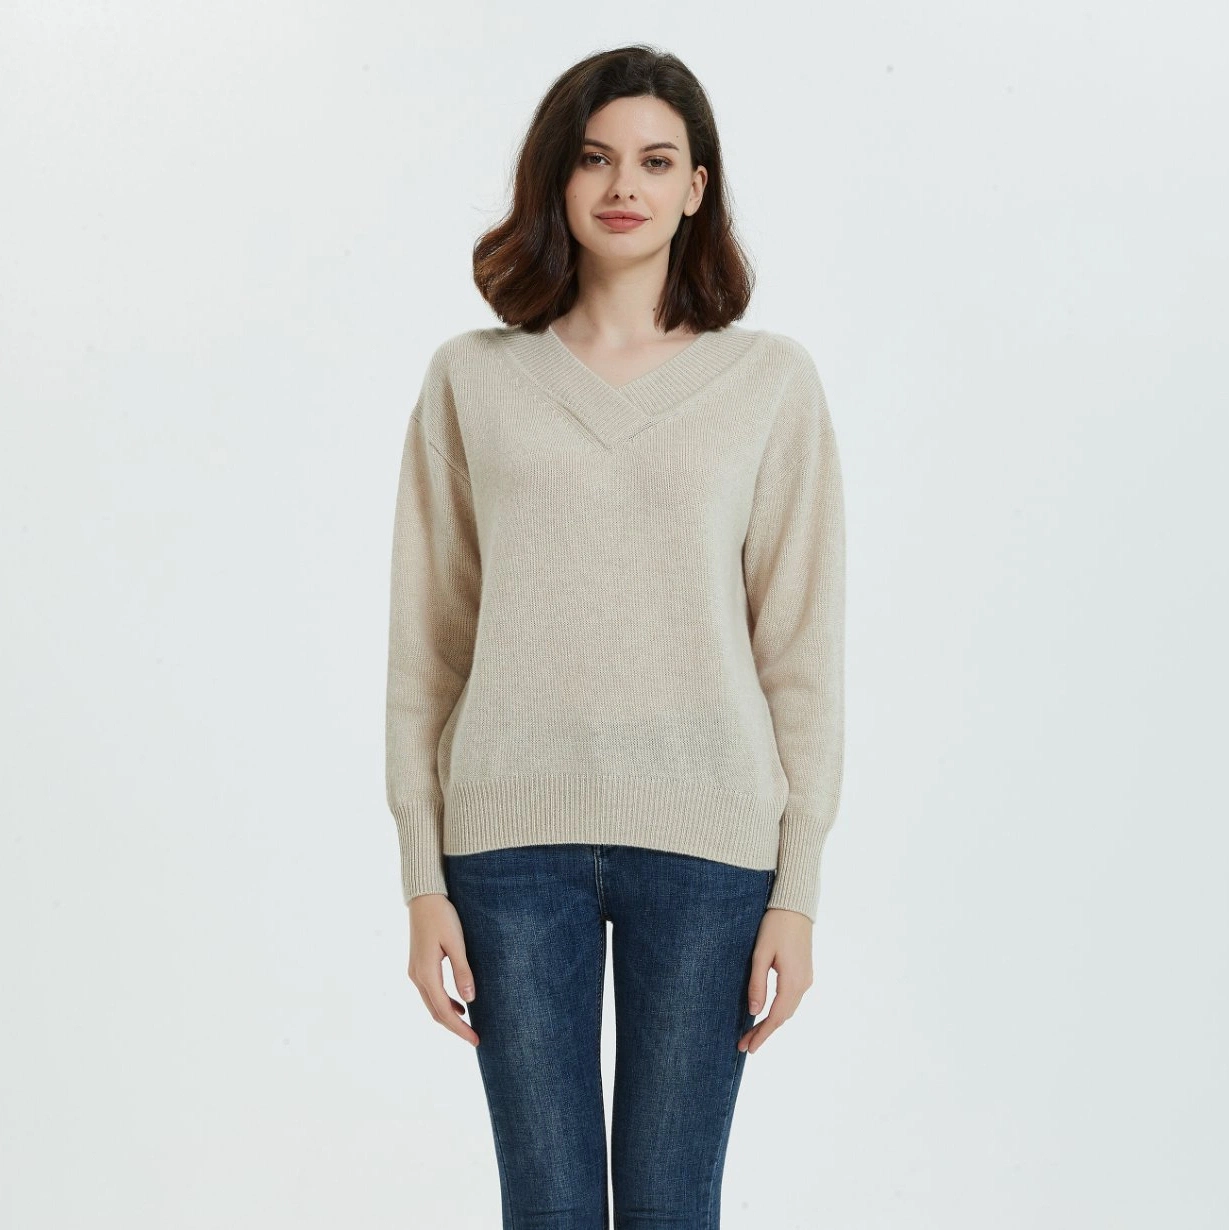 Classic Styles 100% Cashmere Ladies Fashion V-Neck Pullover Sweater